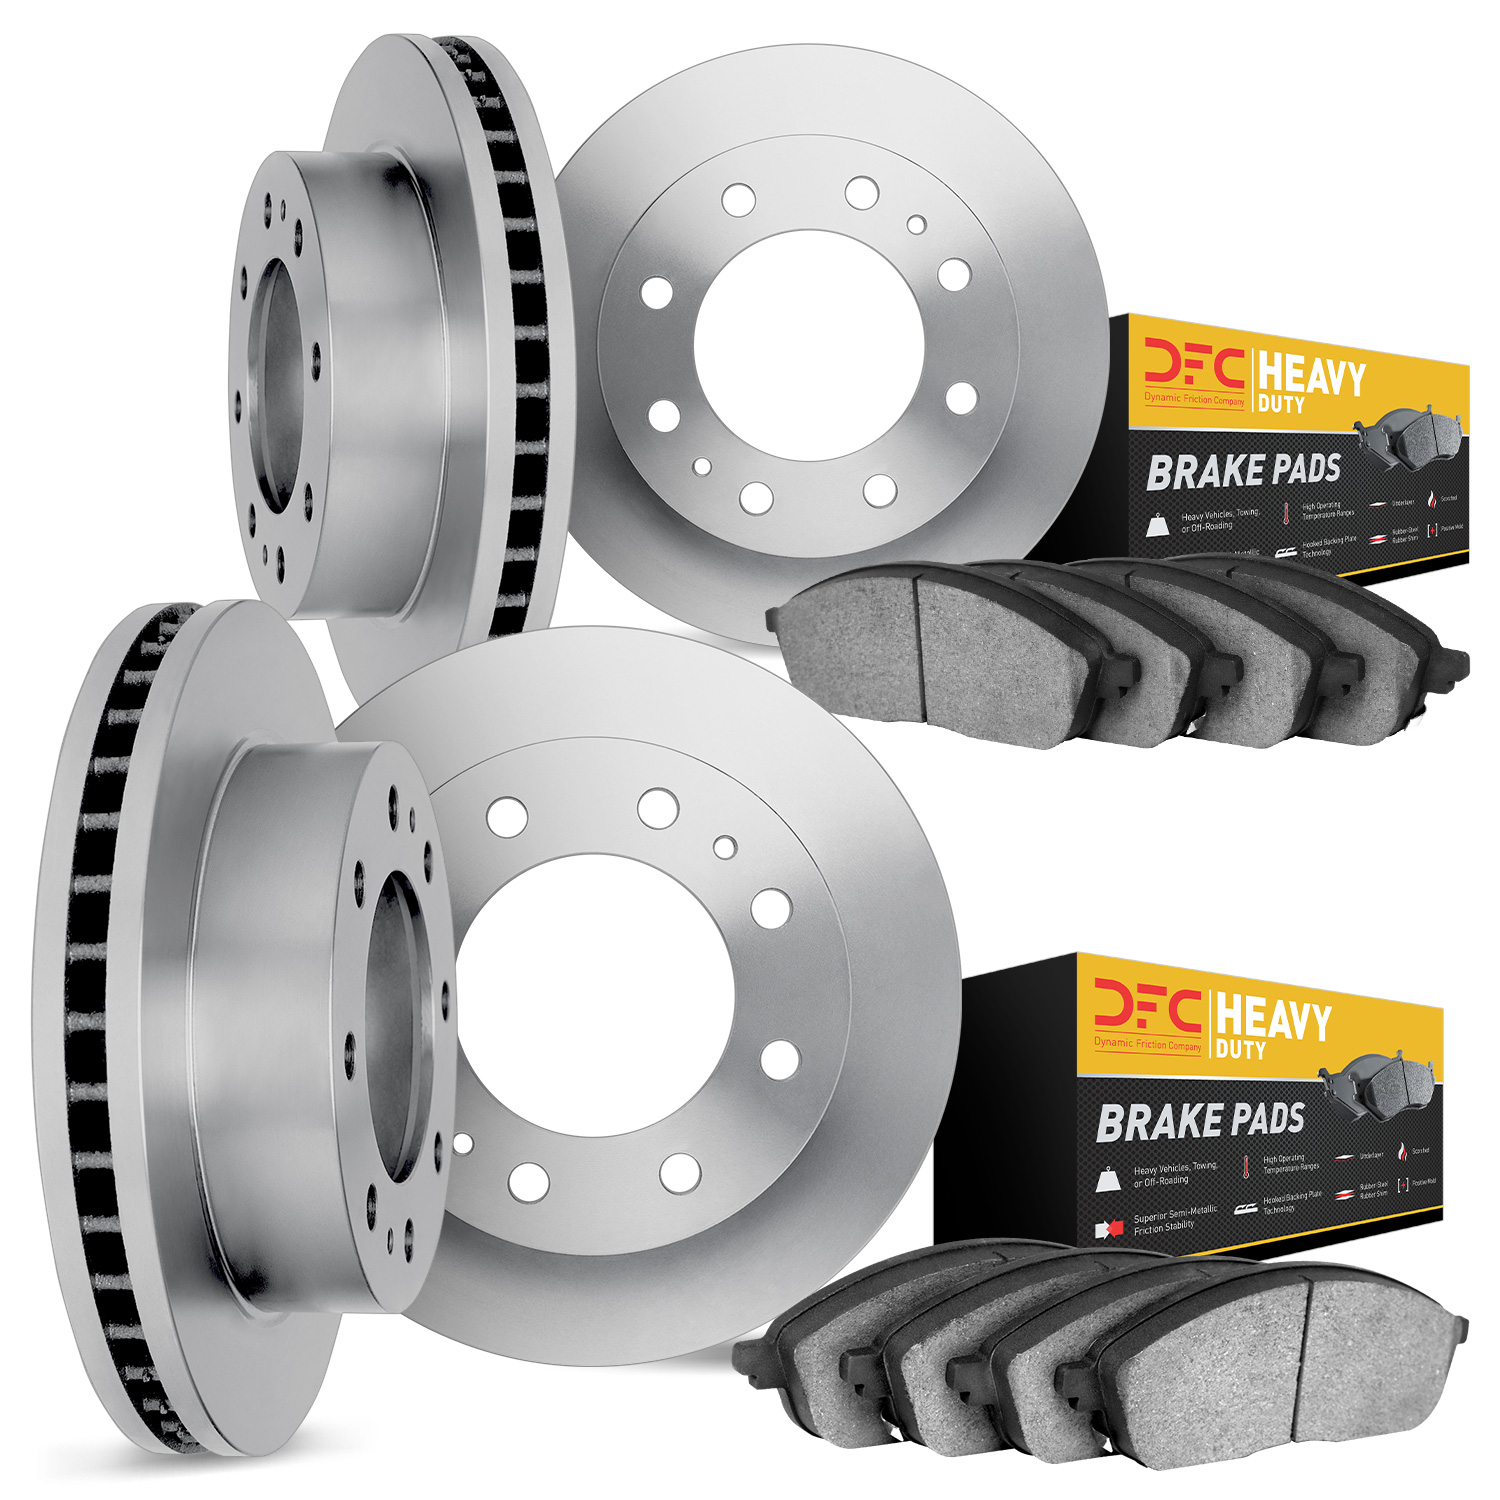 6204-48459 Brake Rotors w/Heavy-Duty Brake Pads Kit, 2001-2010 GM, Position: Front and Rear